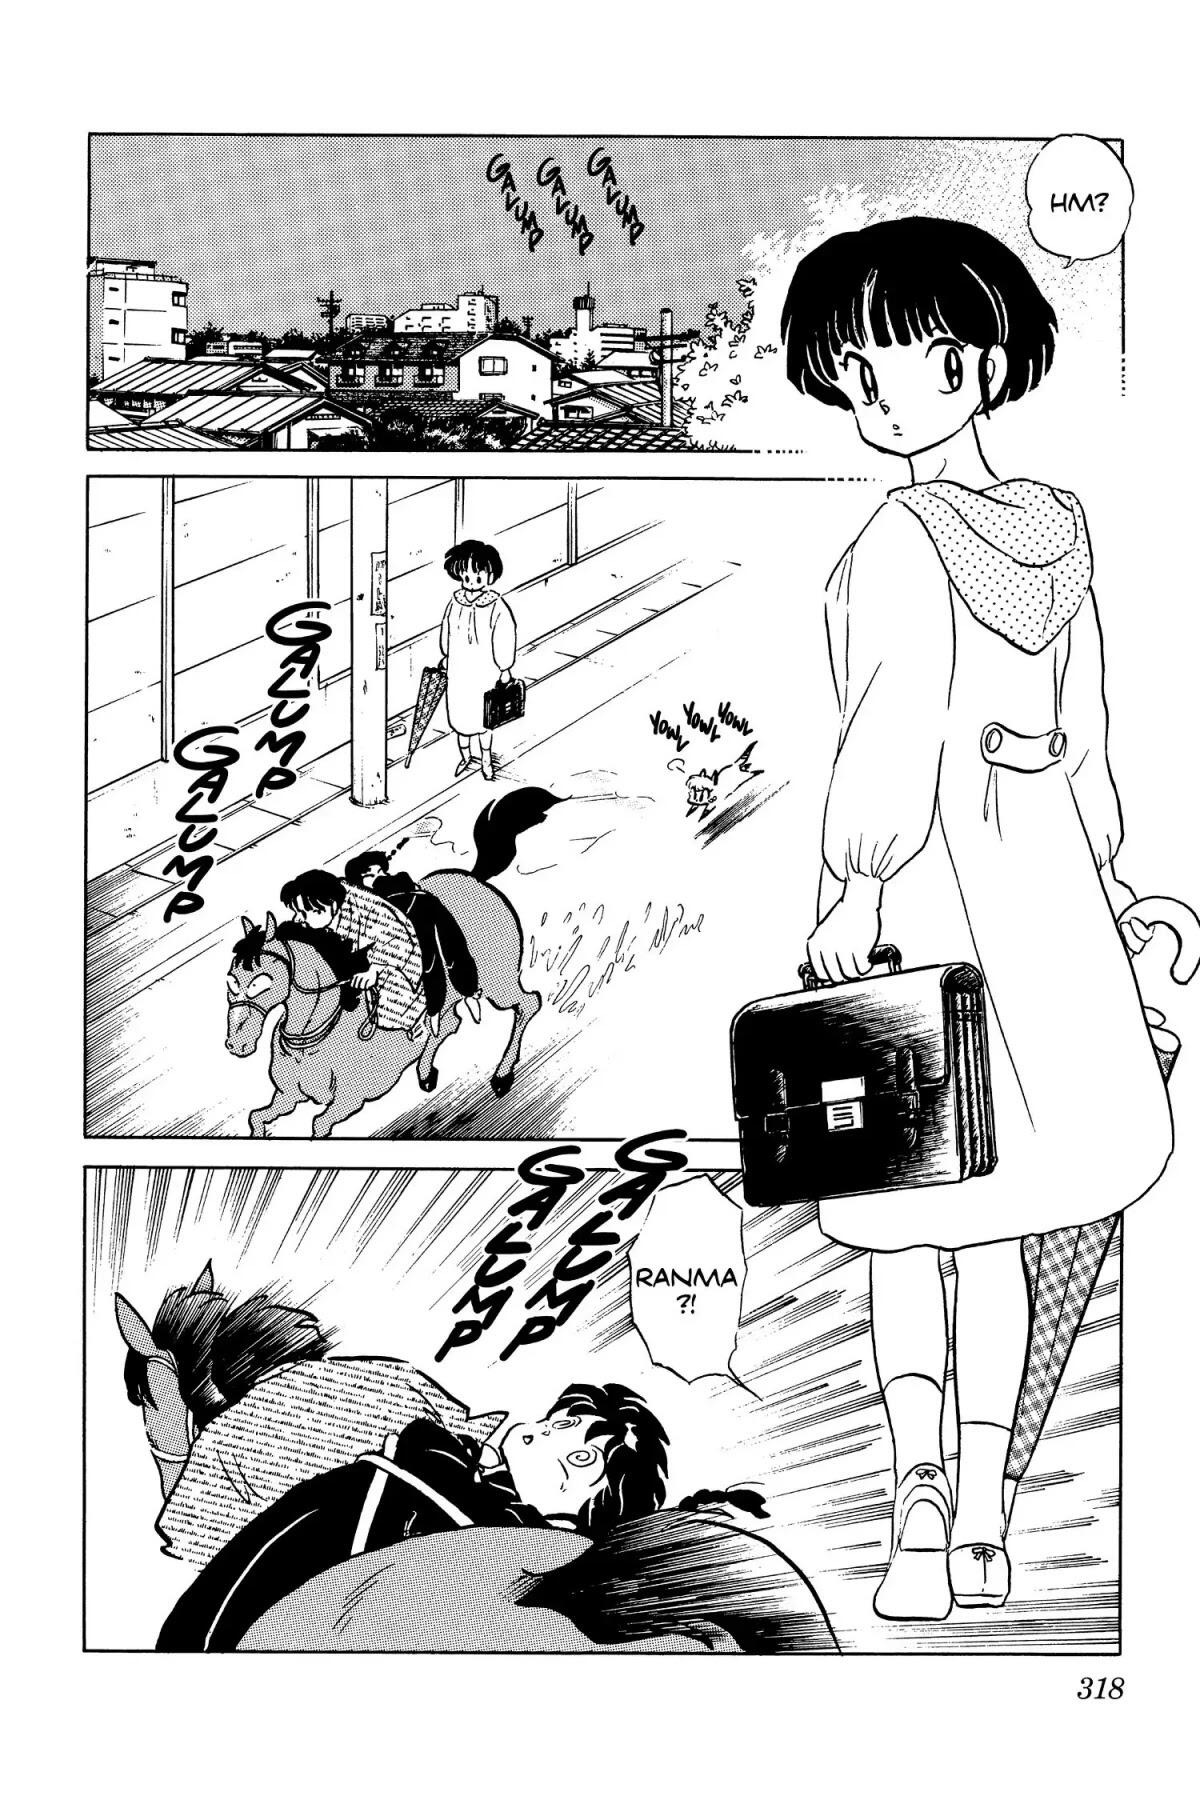 Ranma 1/2 Chapter 56: The Way Of Tea  